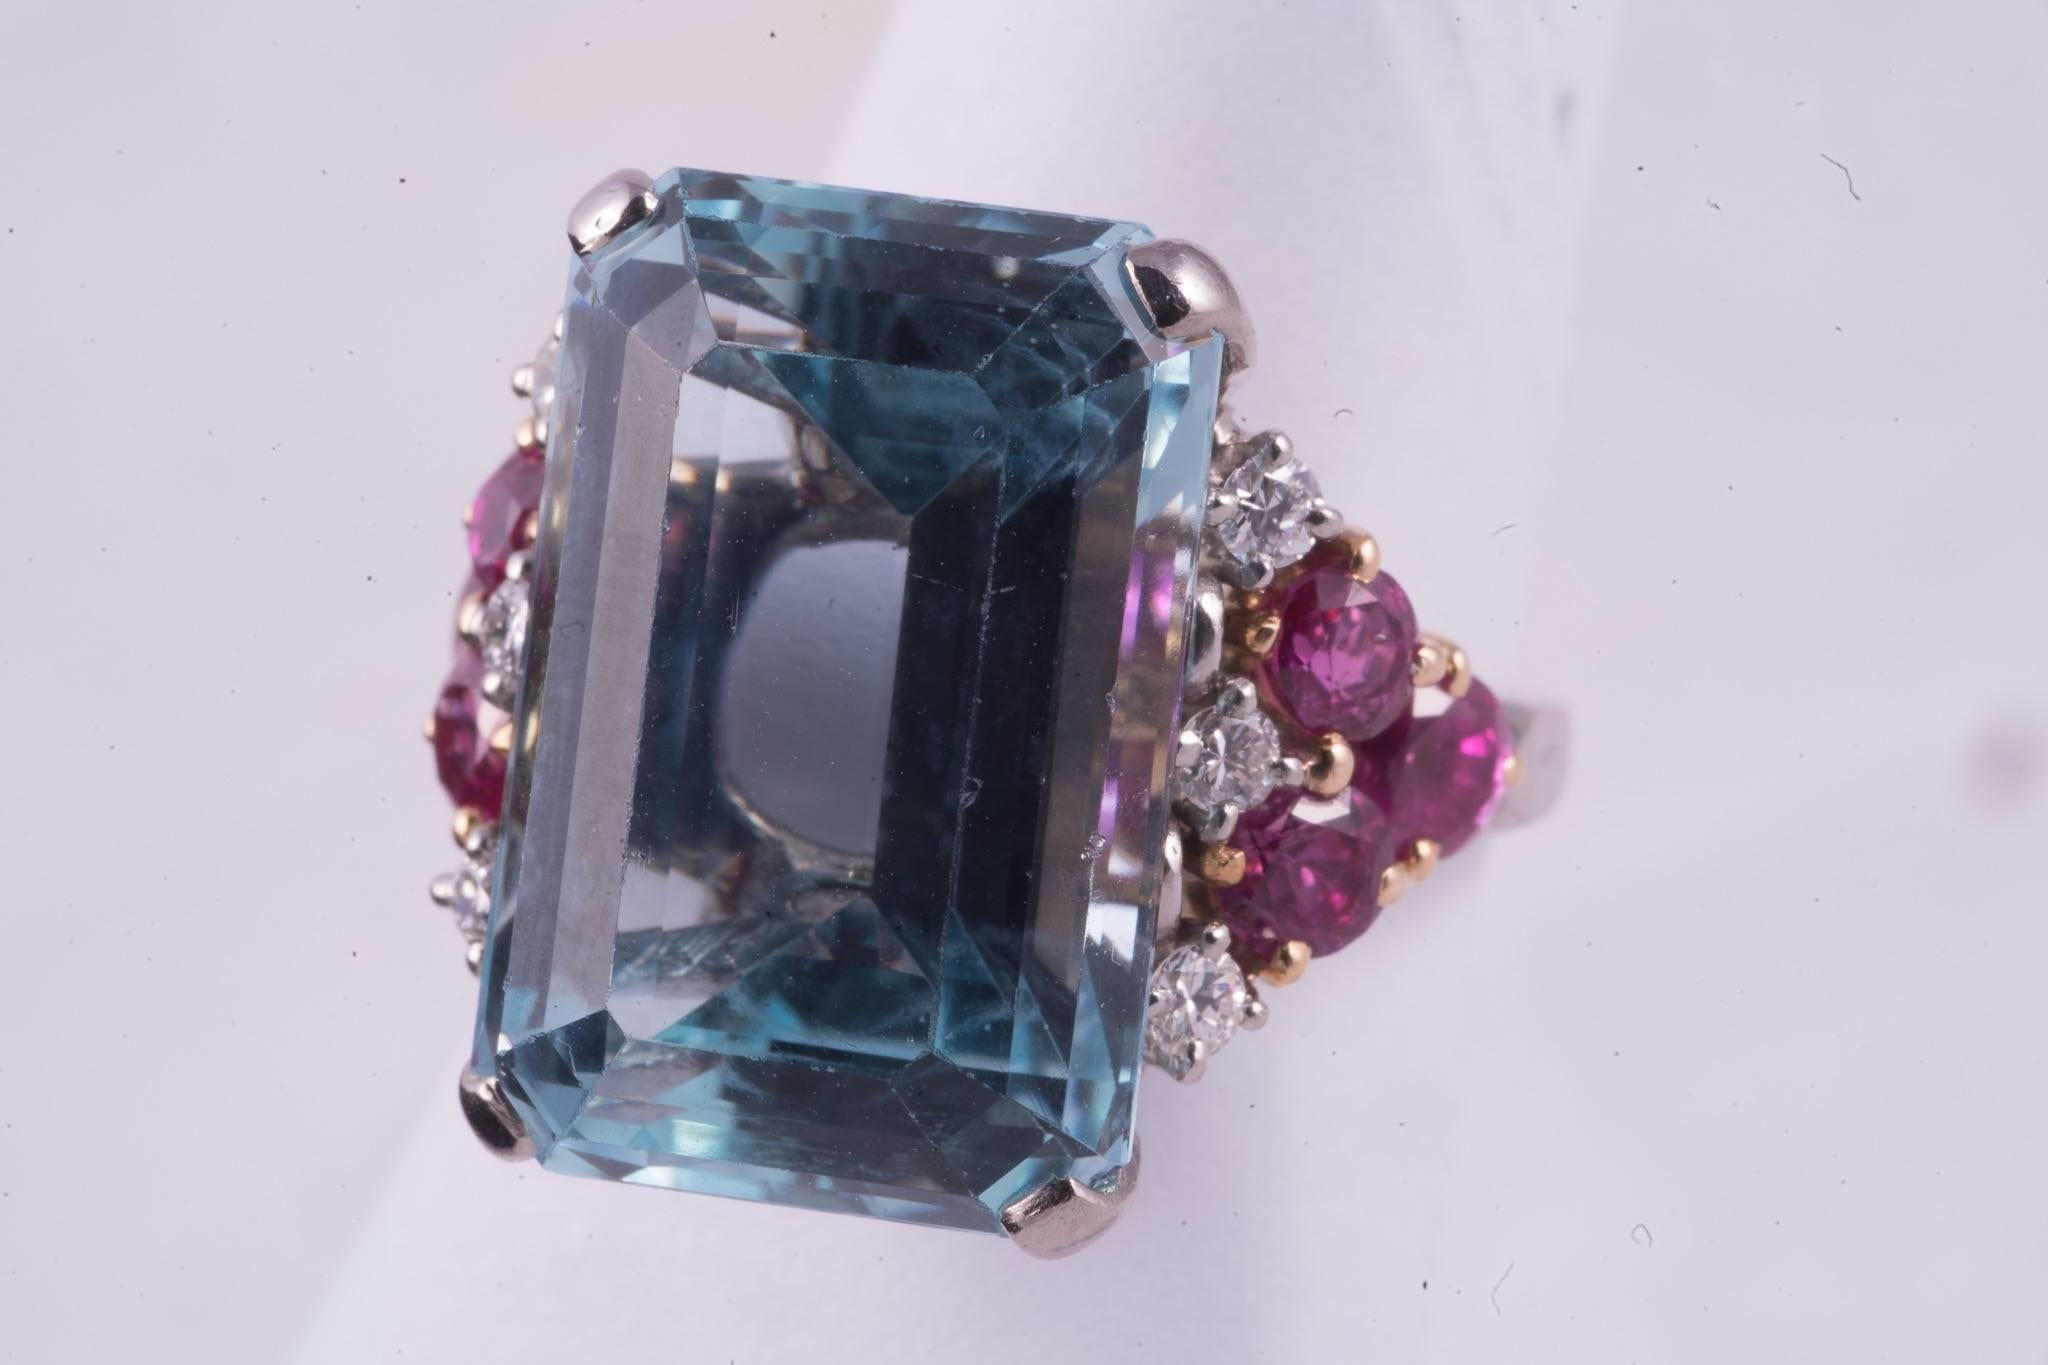 Approx. 13.00cts rectangular cut medium to light blue Aquamarine. There are 6 round cut rubies, 3 on each side of the ring that weigh a total of approx. 1.20cts. There are 3 diamonds on either side of the aqua that weigh approx. .30cts total.